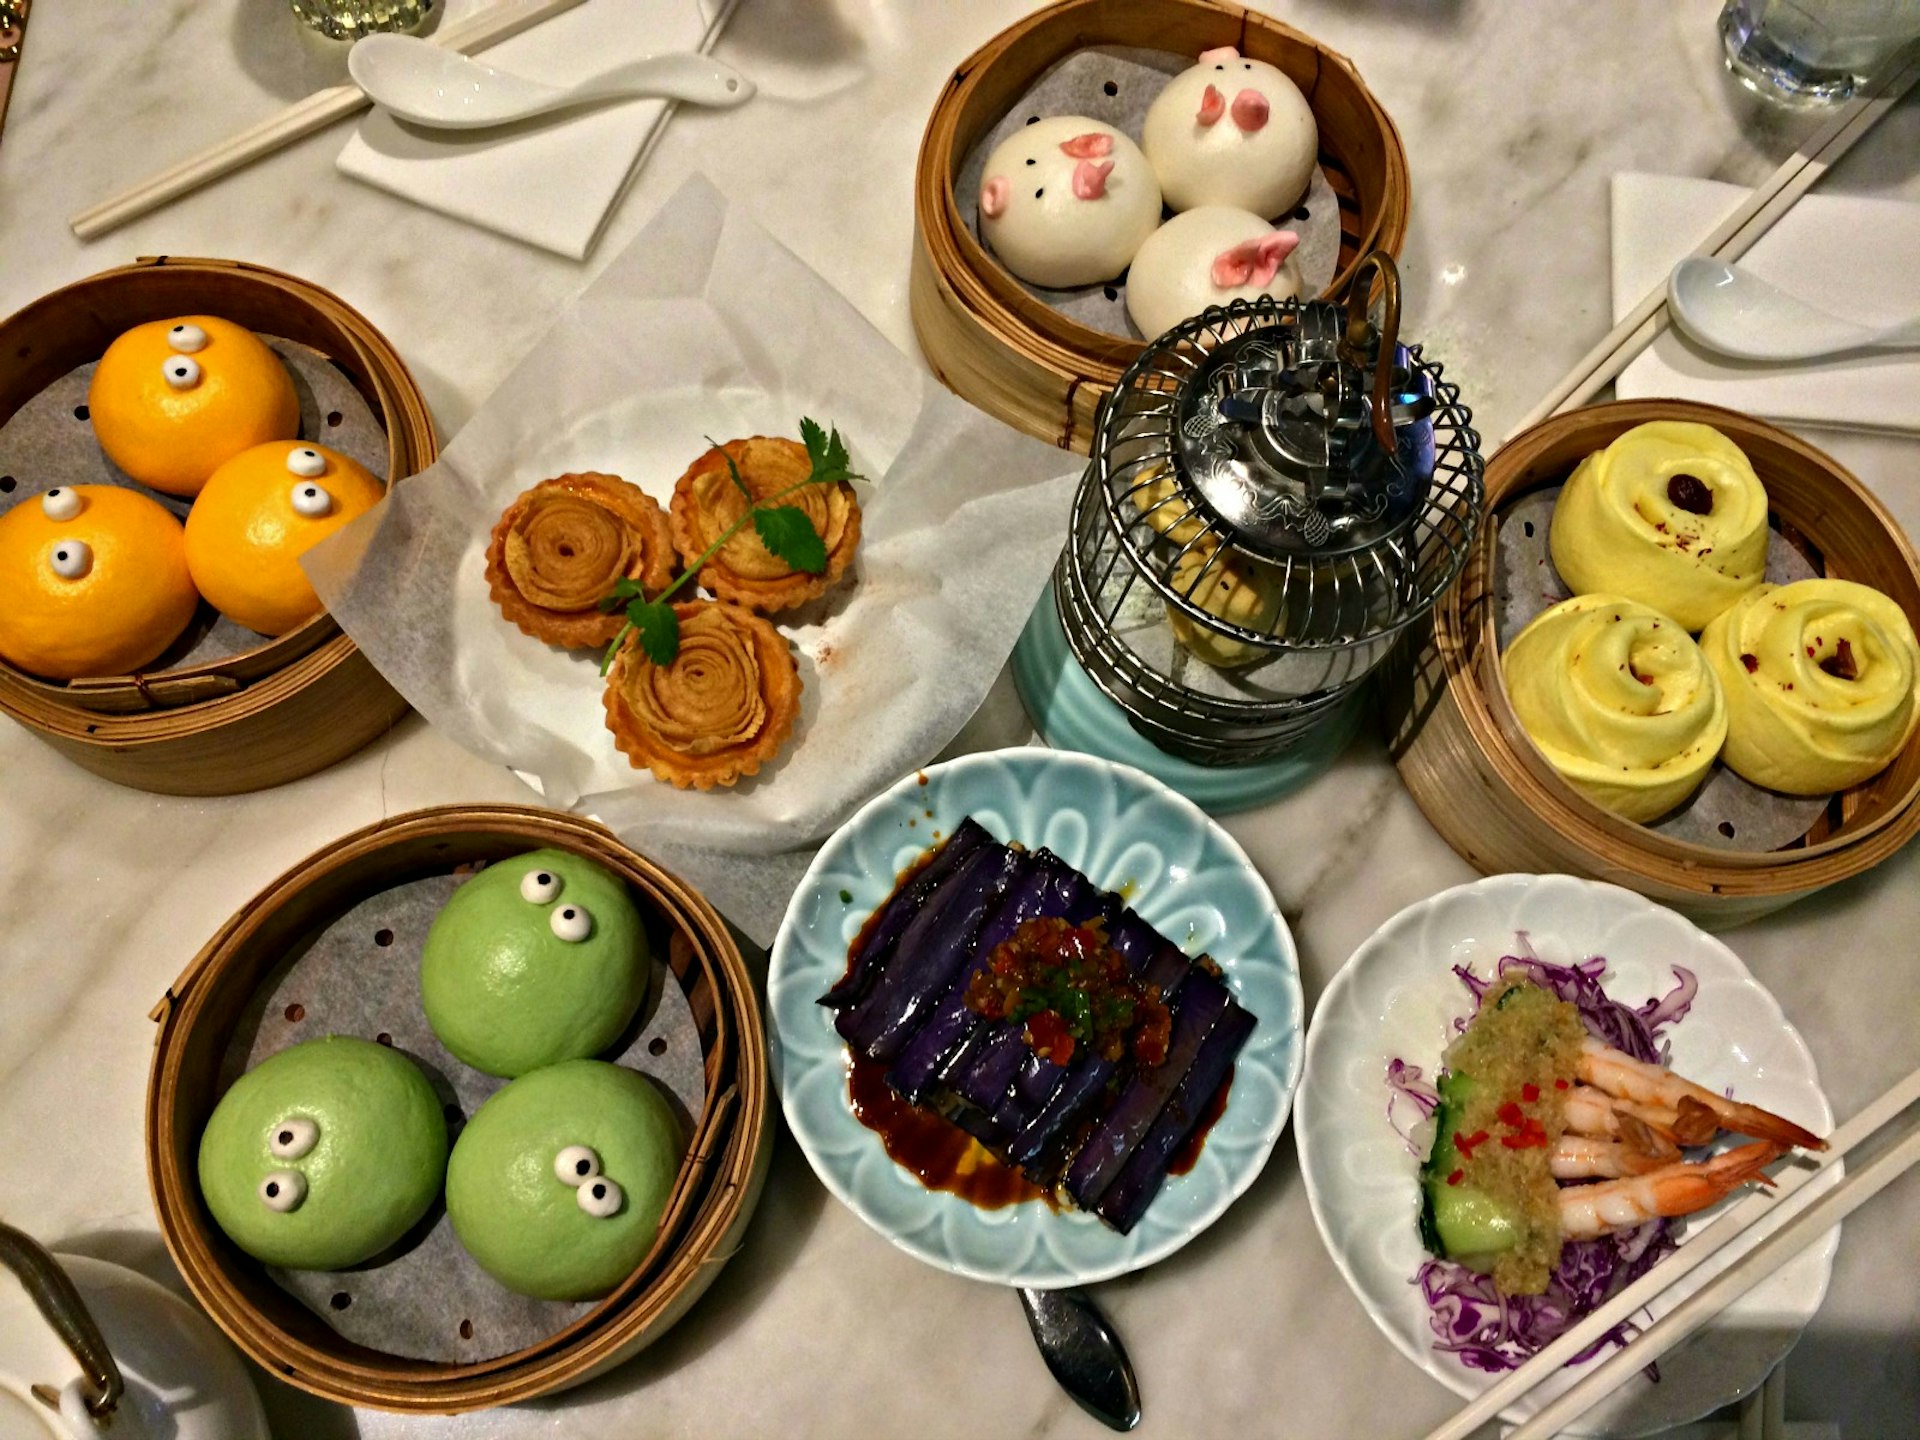 An array of the treats on offer at Yum Cha Emily Petsko / Lonely Planet